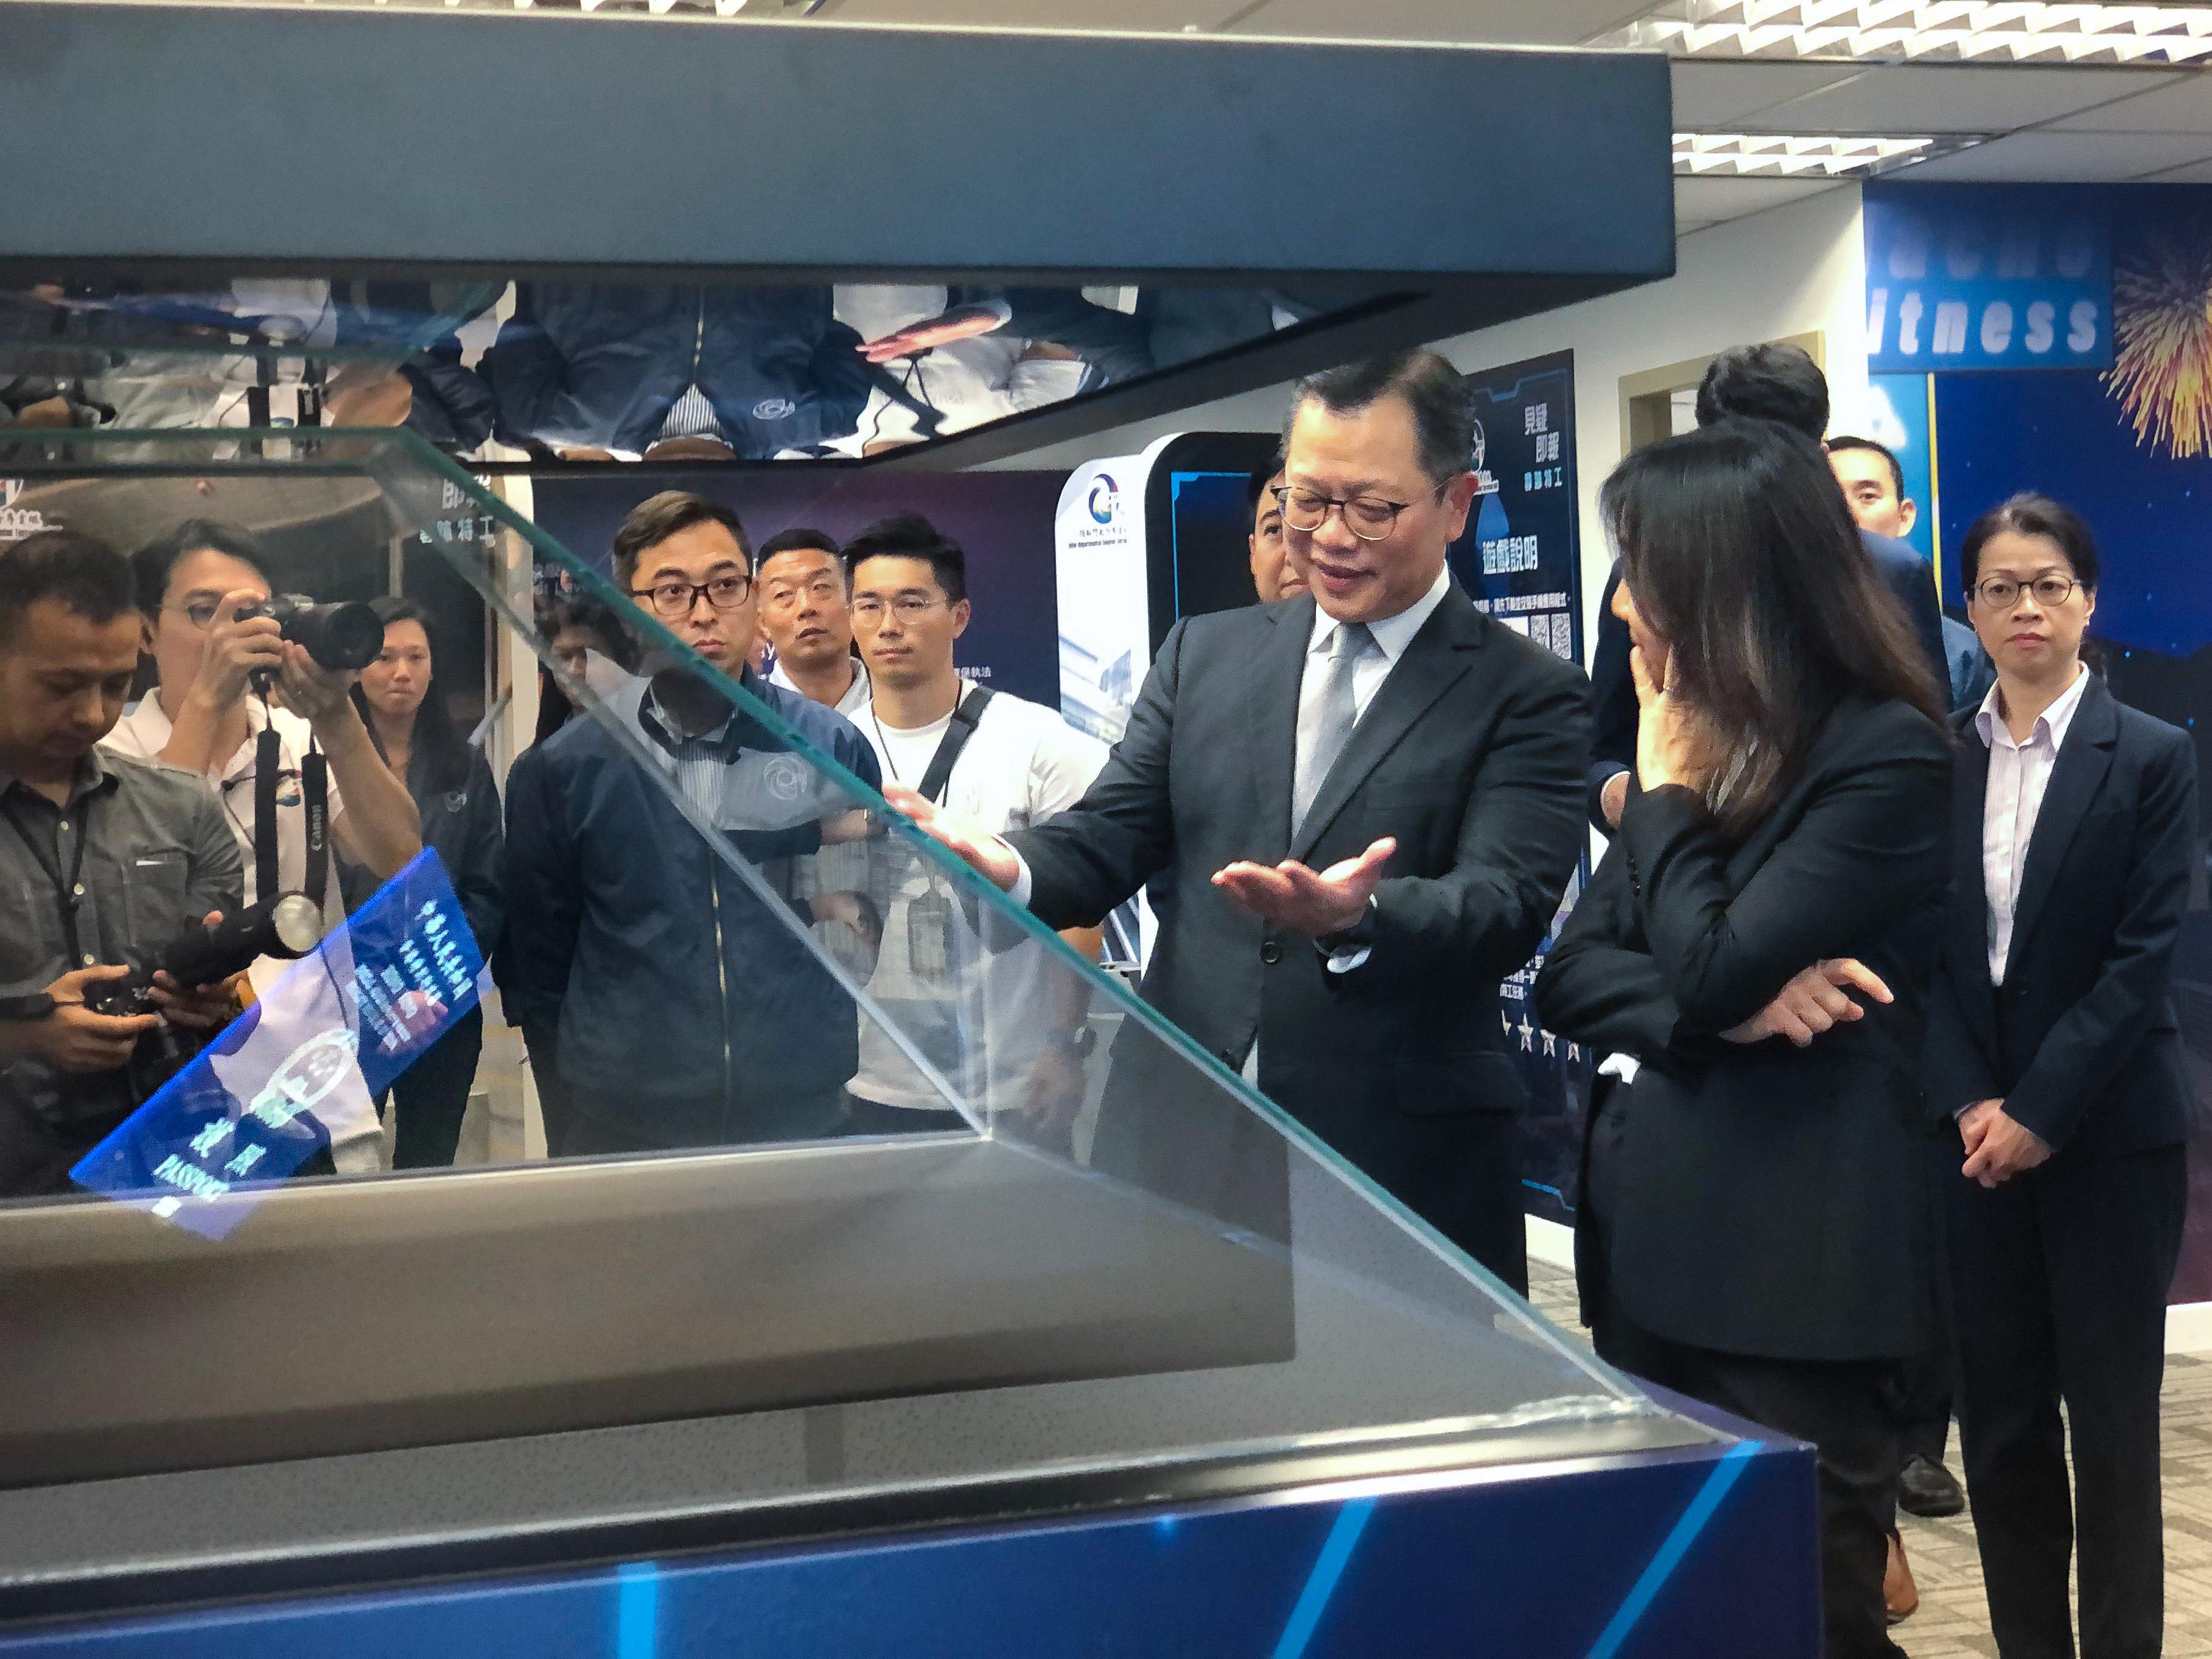 The “Safe Community Hub” (The Hub) run by the Inter-departmental Counter Terrorism Unit (ICTU) was officially opened today (October 27). Photo shows the officiating guests touring an interactive hologram set up in the Hub.